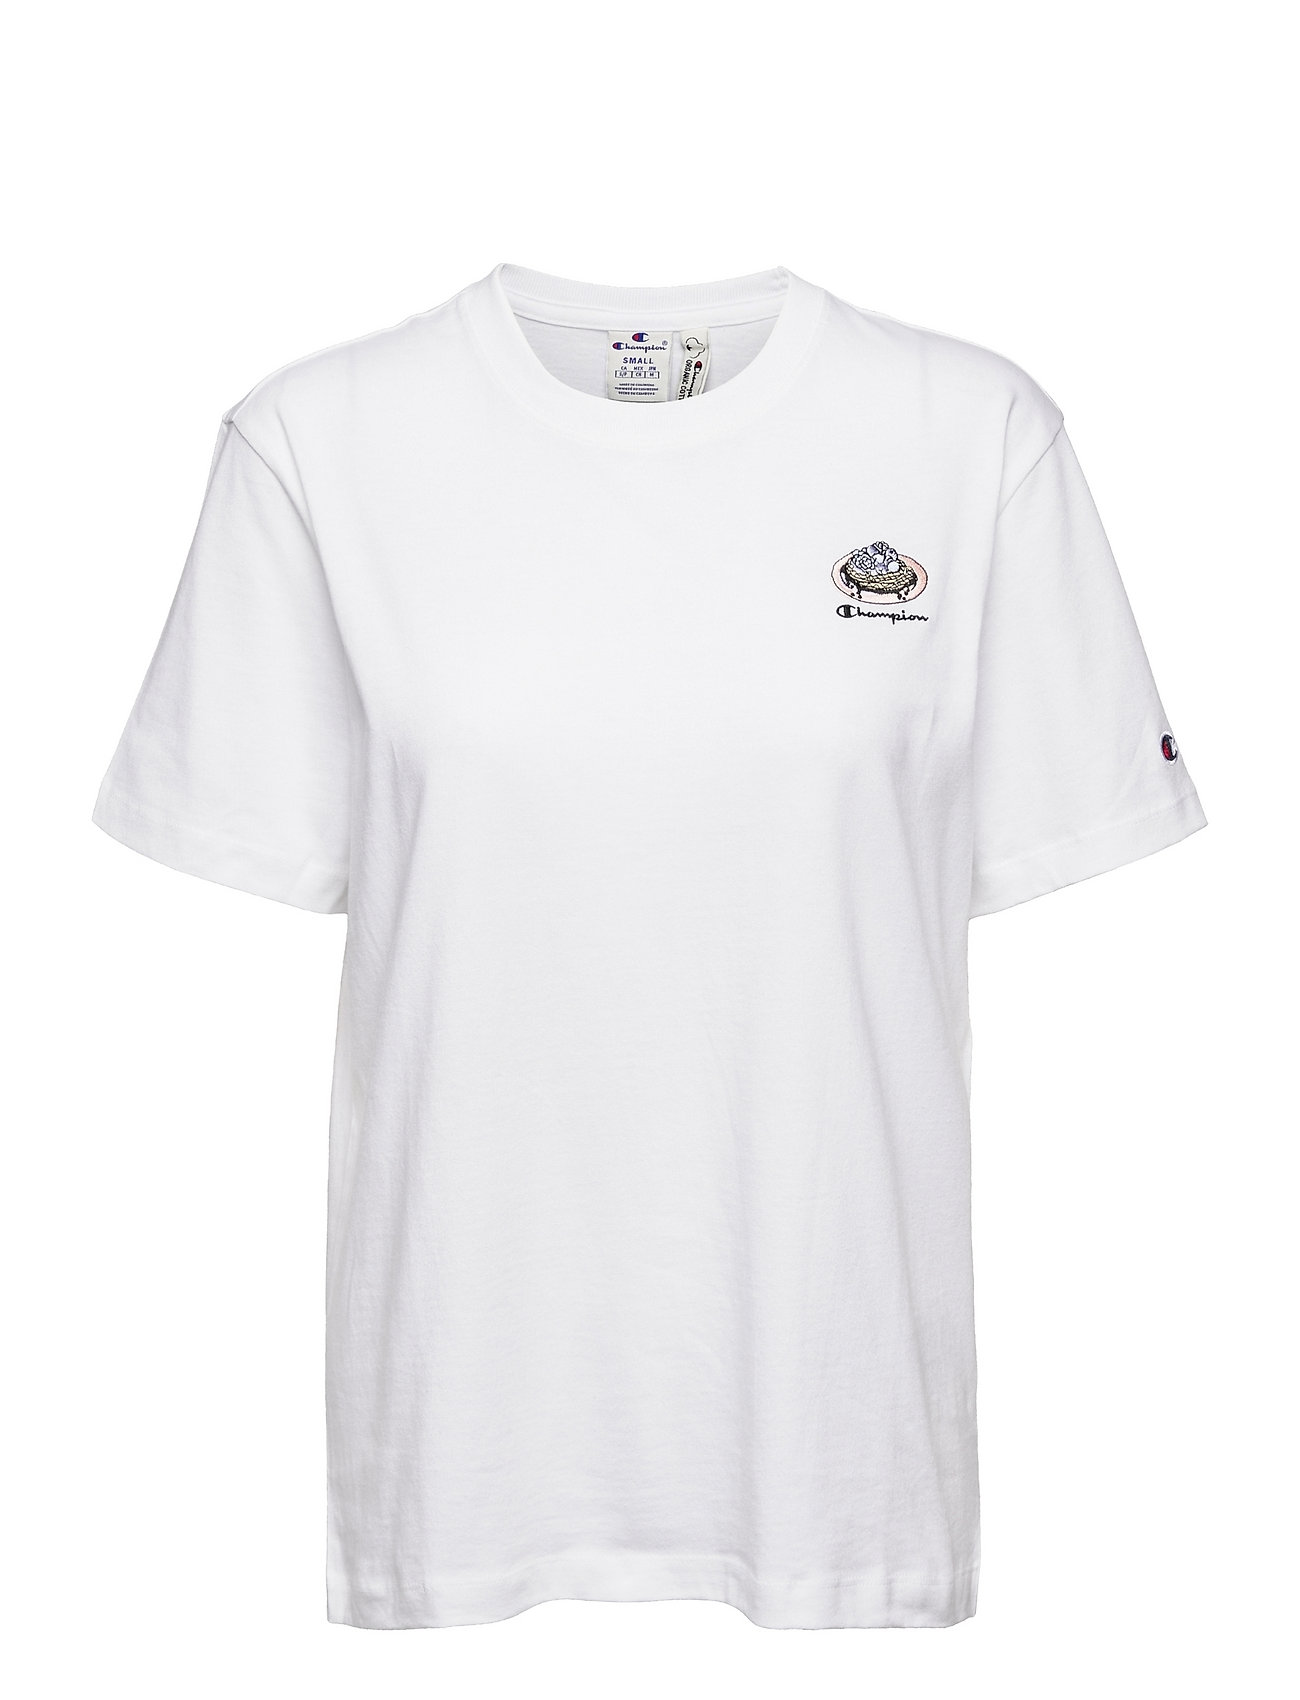 Champion Crewneck T-shirt (White), (16.80 €) | Large selection of outlet-styles |